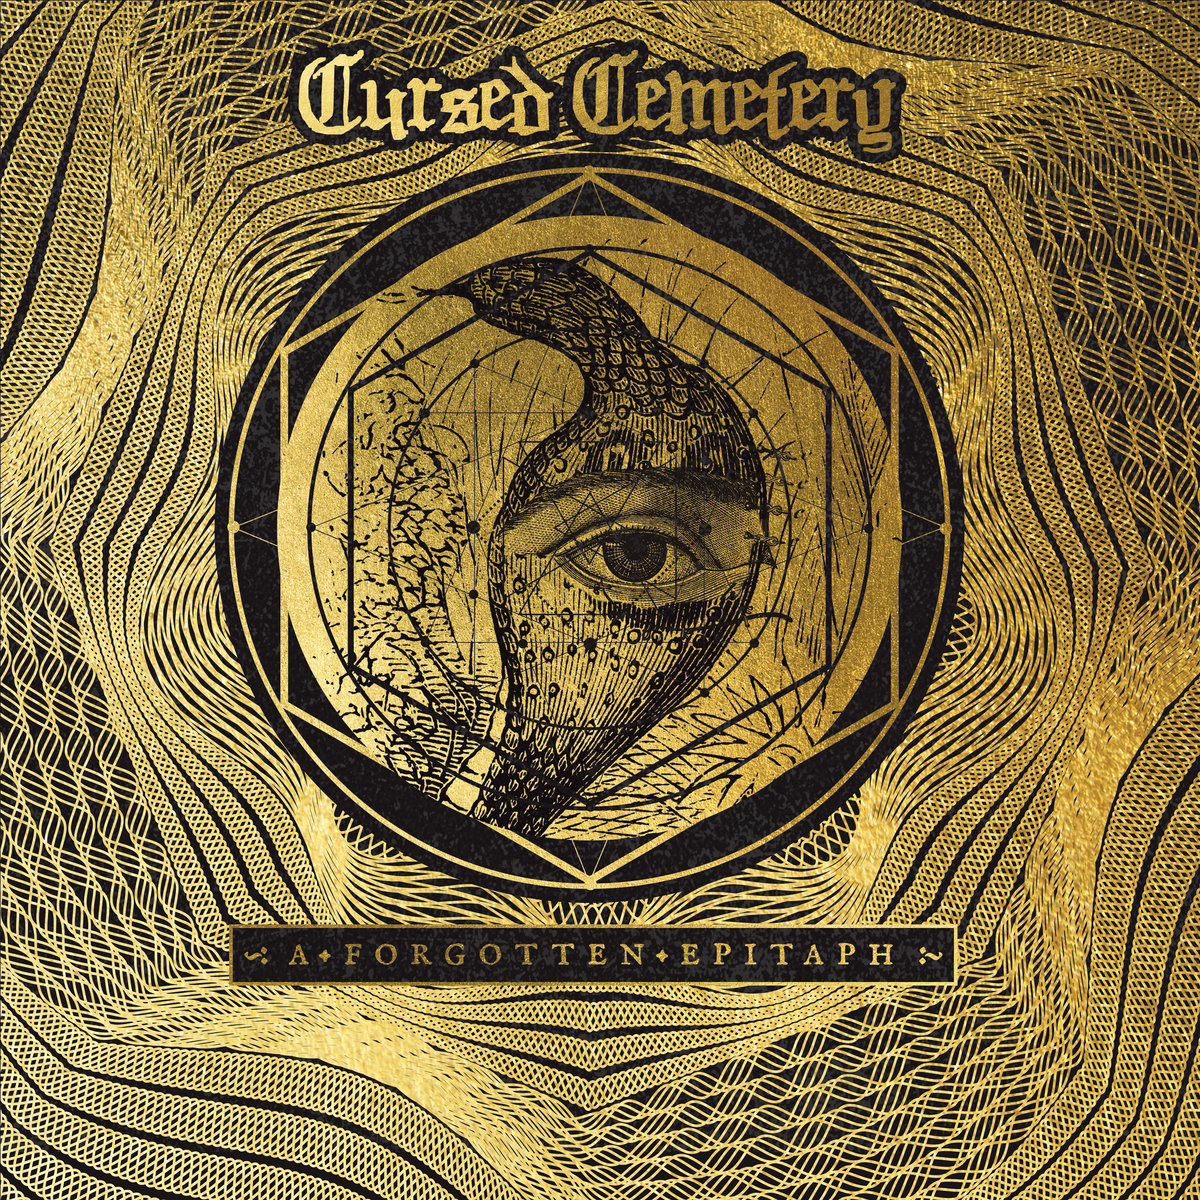 CURSED CEMETERY - A Forgotten Epitaph  (Digipack)